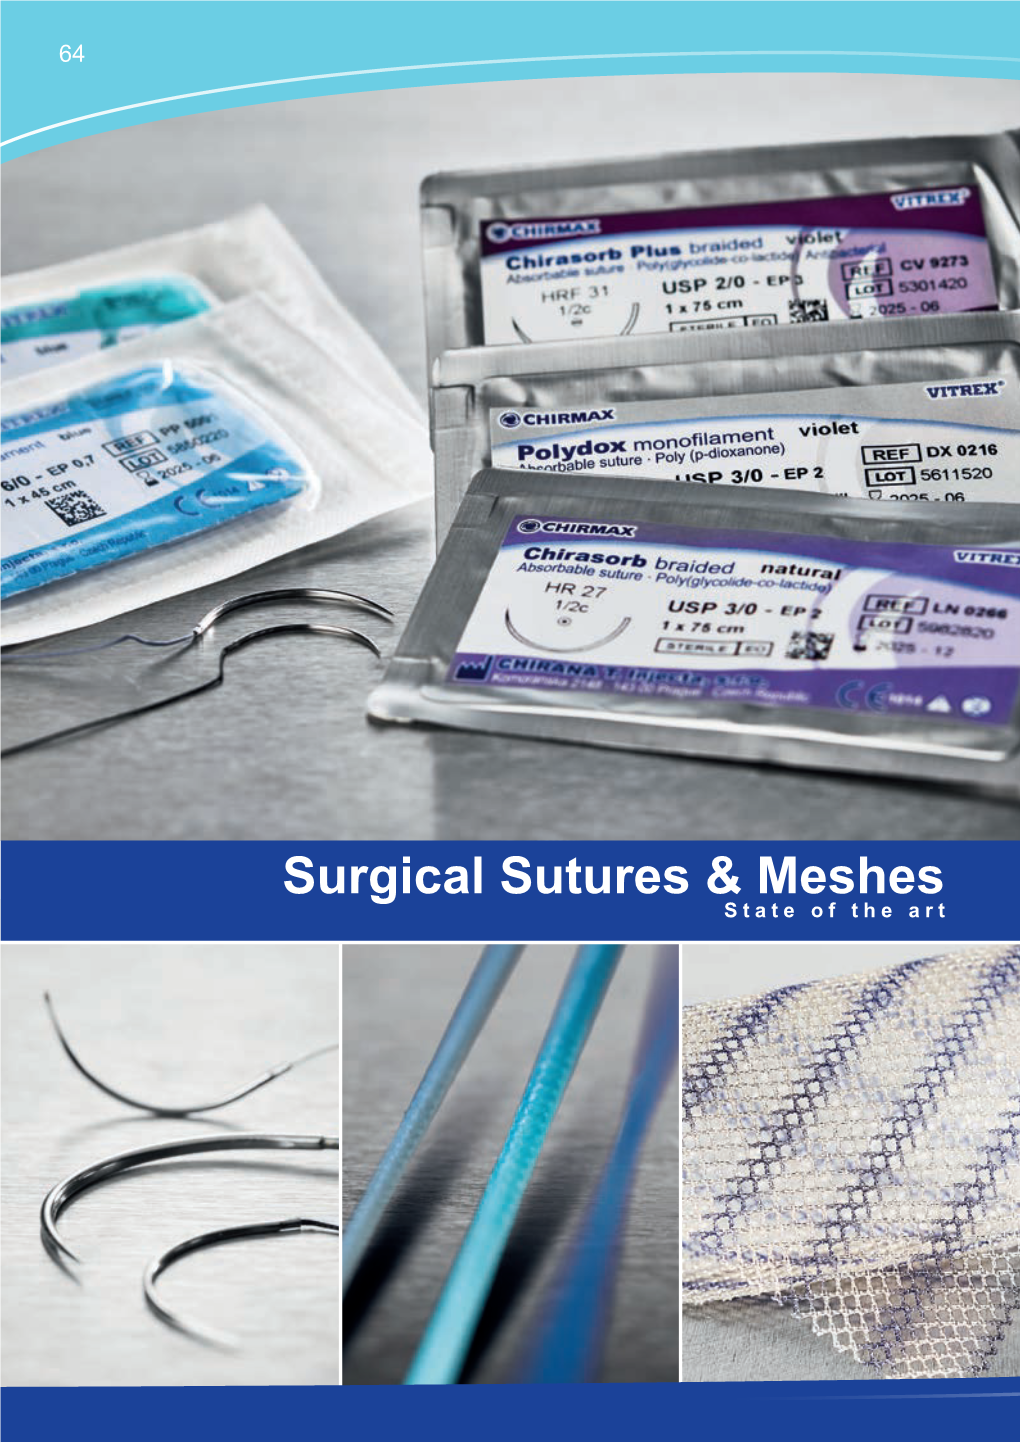 Surgical Sutures & Meshes